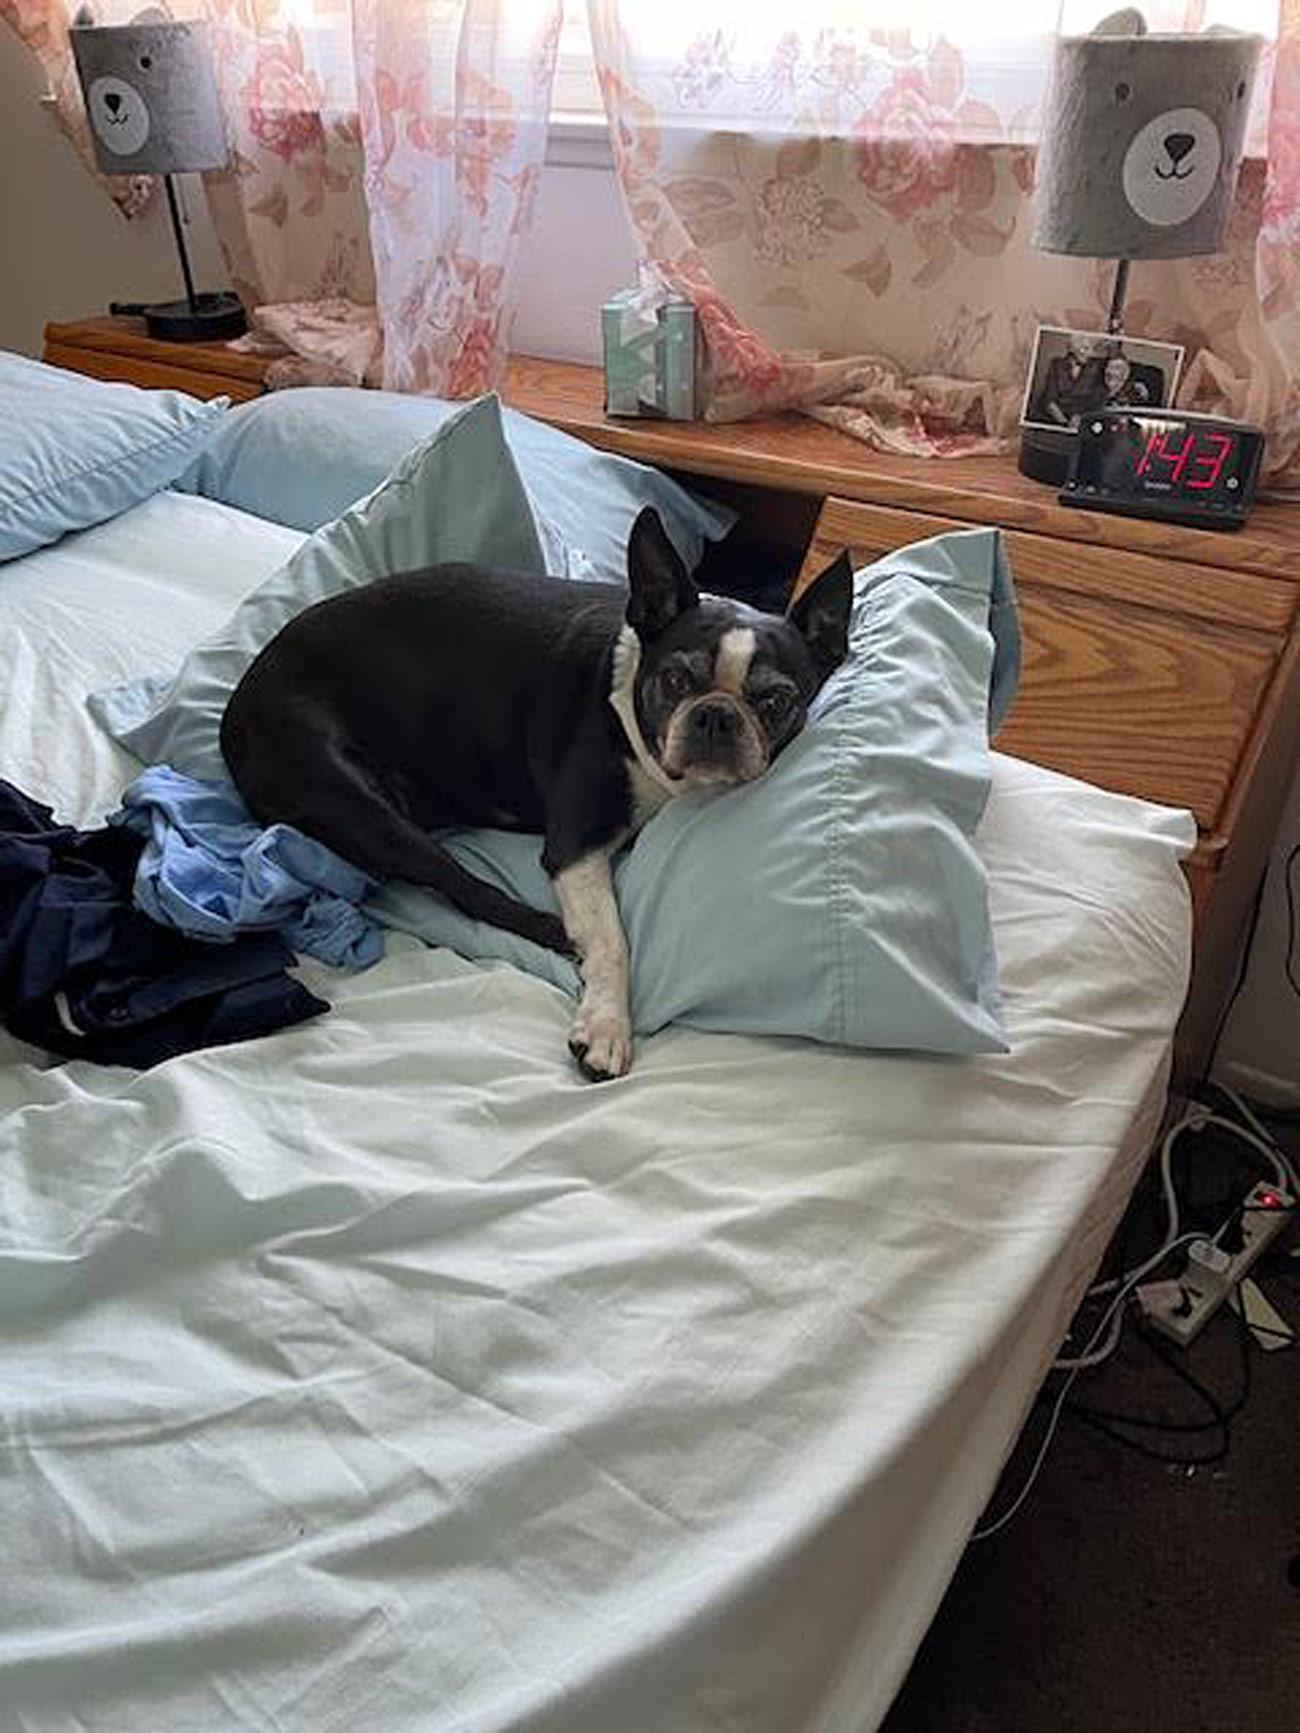 Dear Readers, this is Lucy, my Boston Terrier. She is 13-years-old and misses her mommy because she’s got a broken hip.